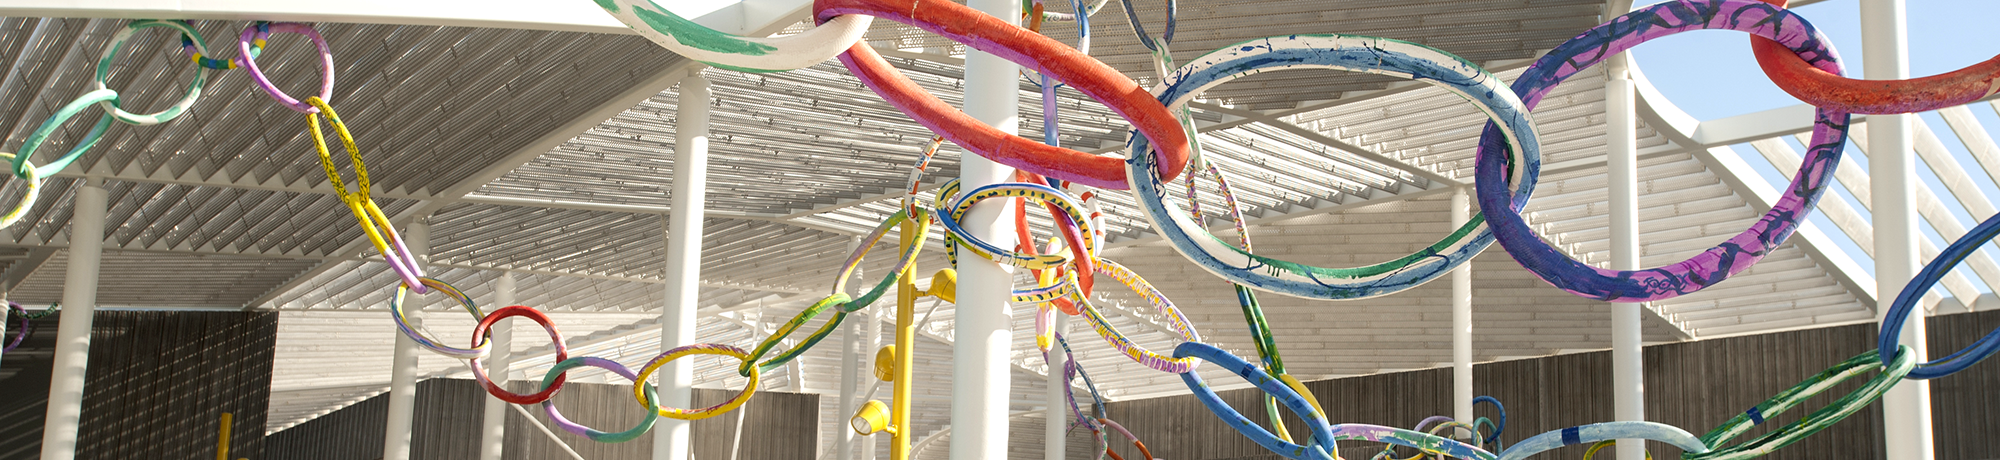 Colorful decorations at the Shrem Museum